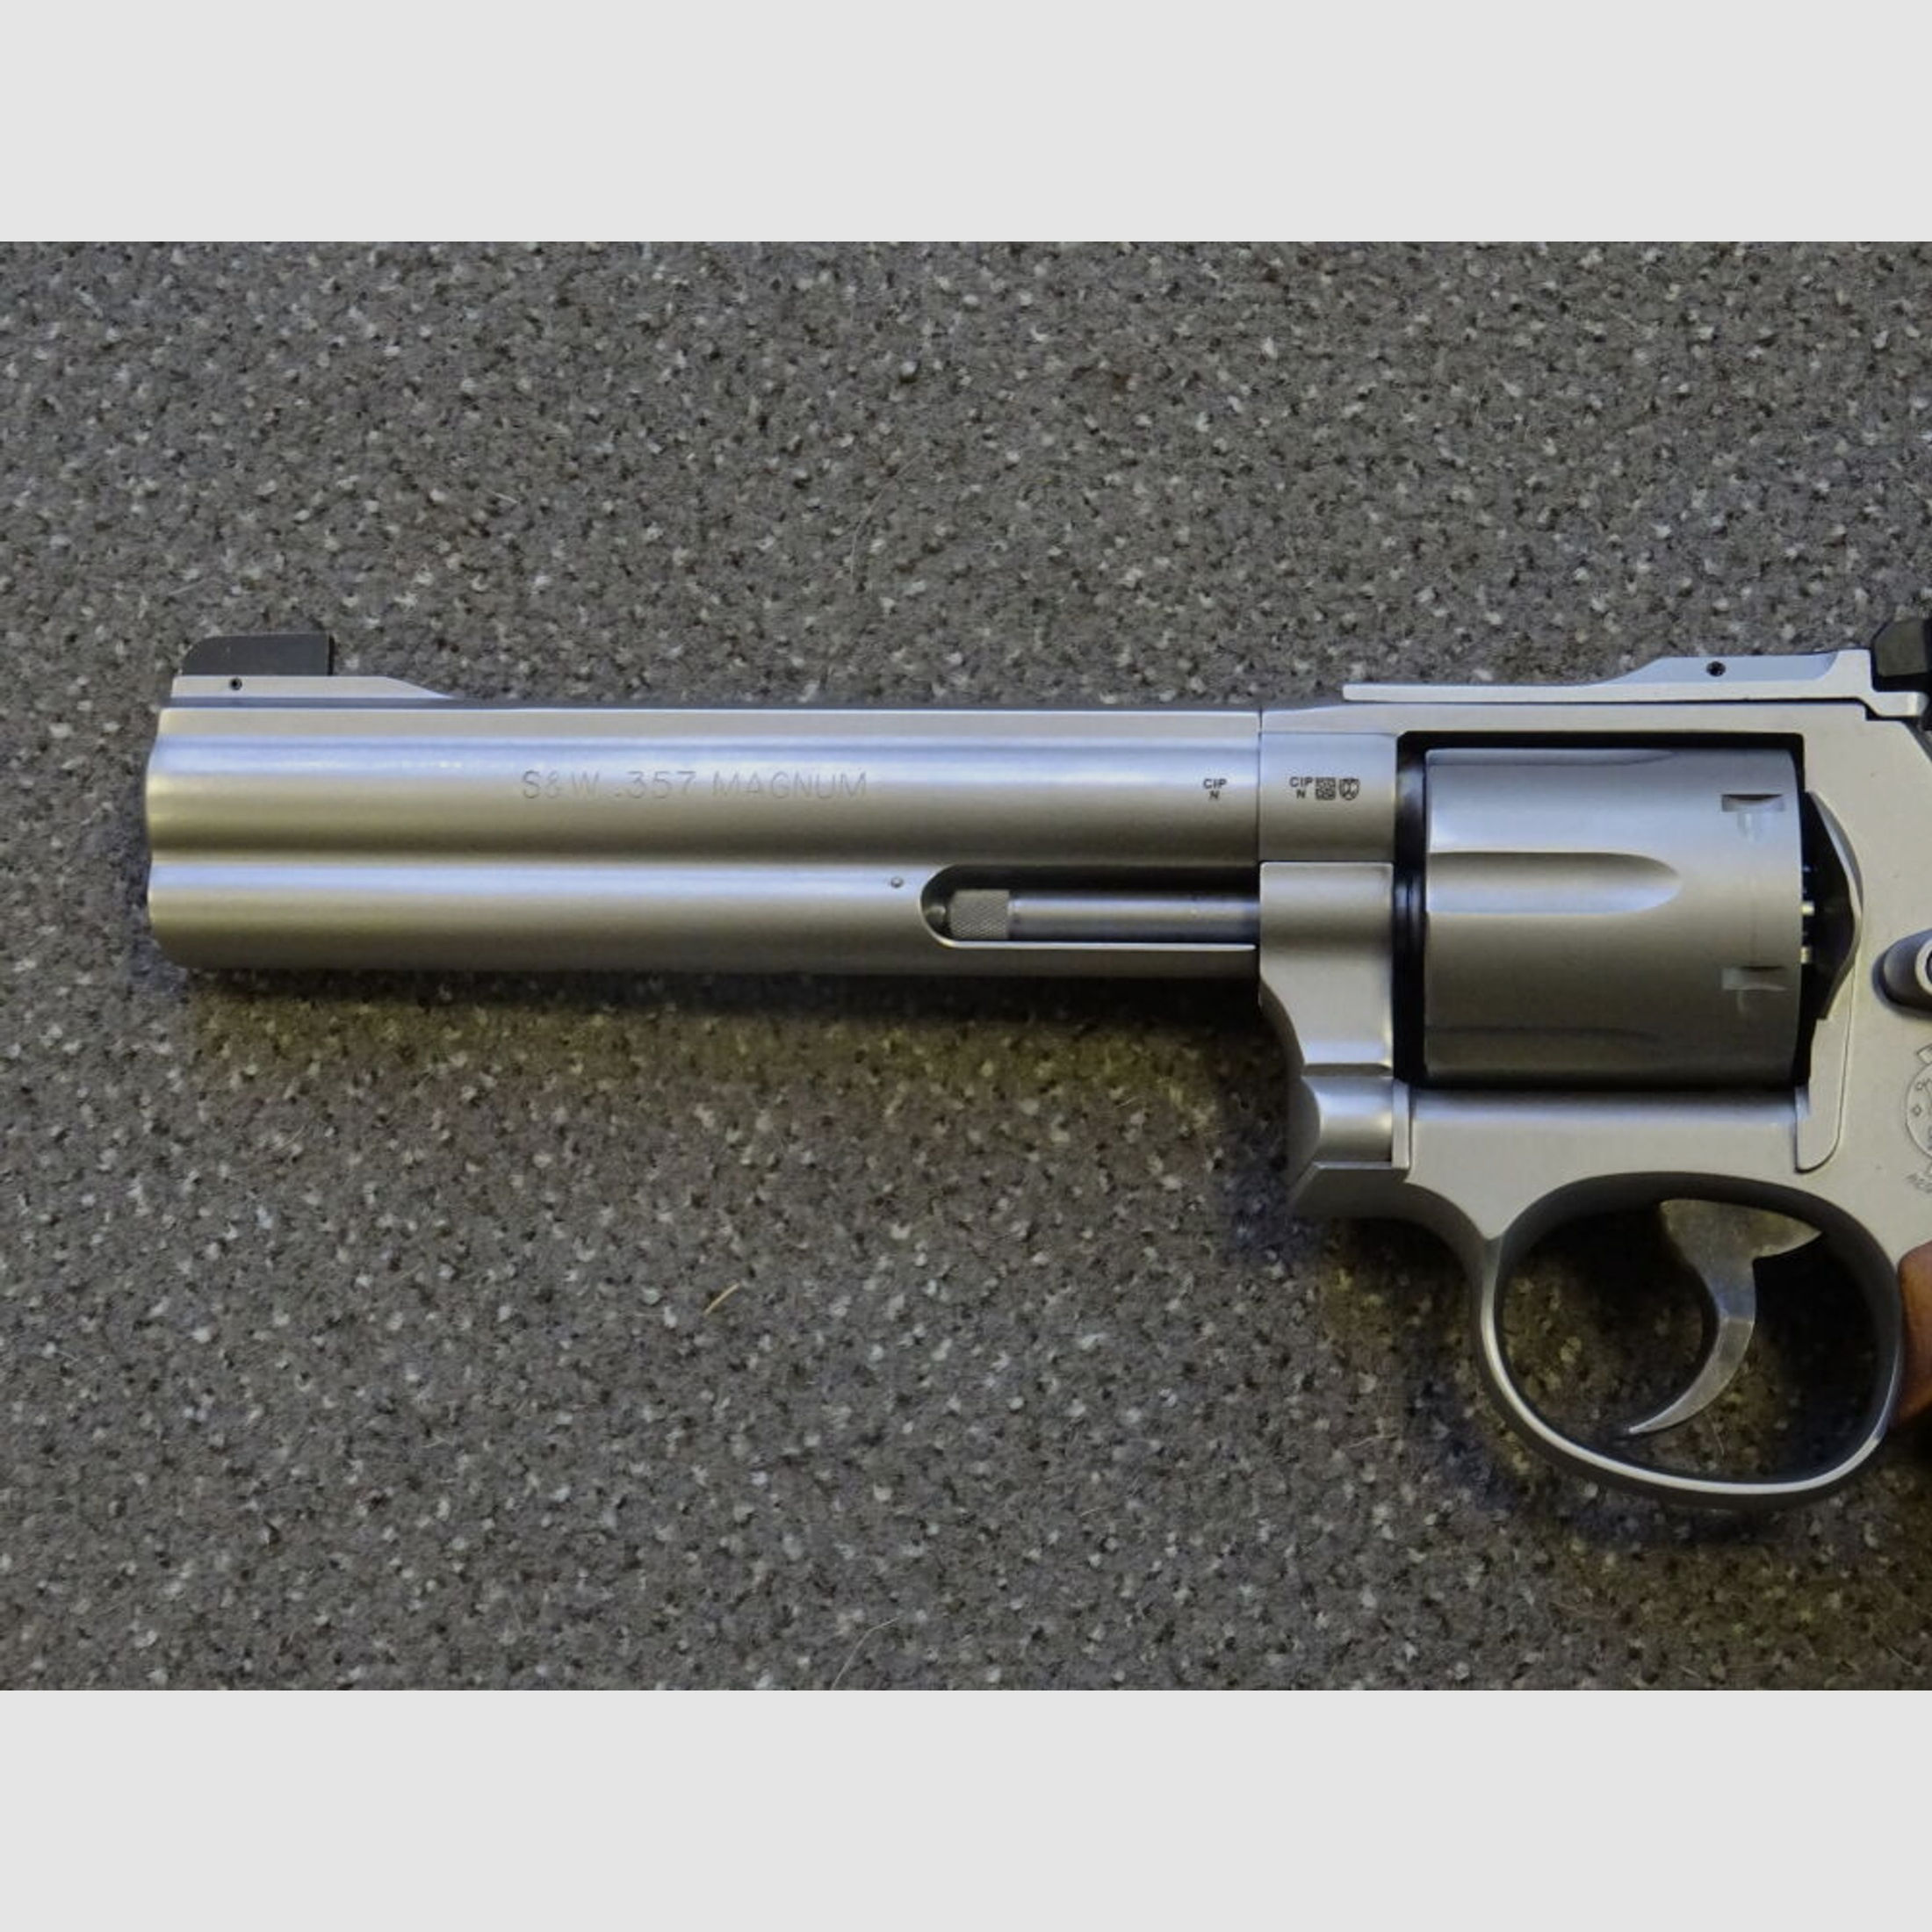 S&W SMITH & WESSON	 686-6 TARGET CHAMPION 6"